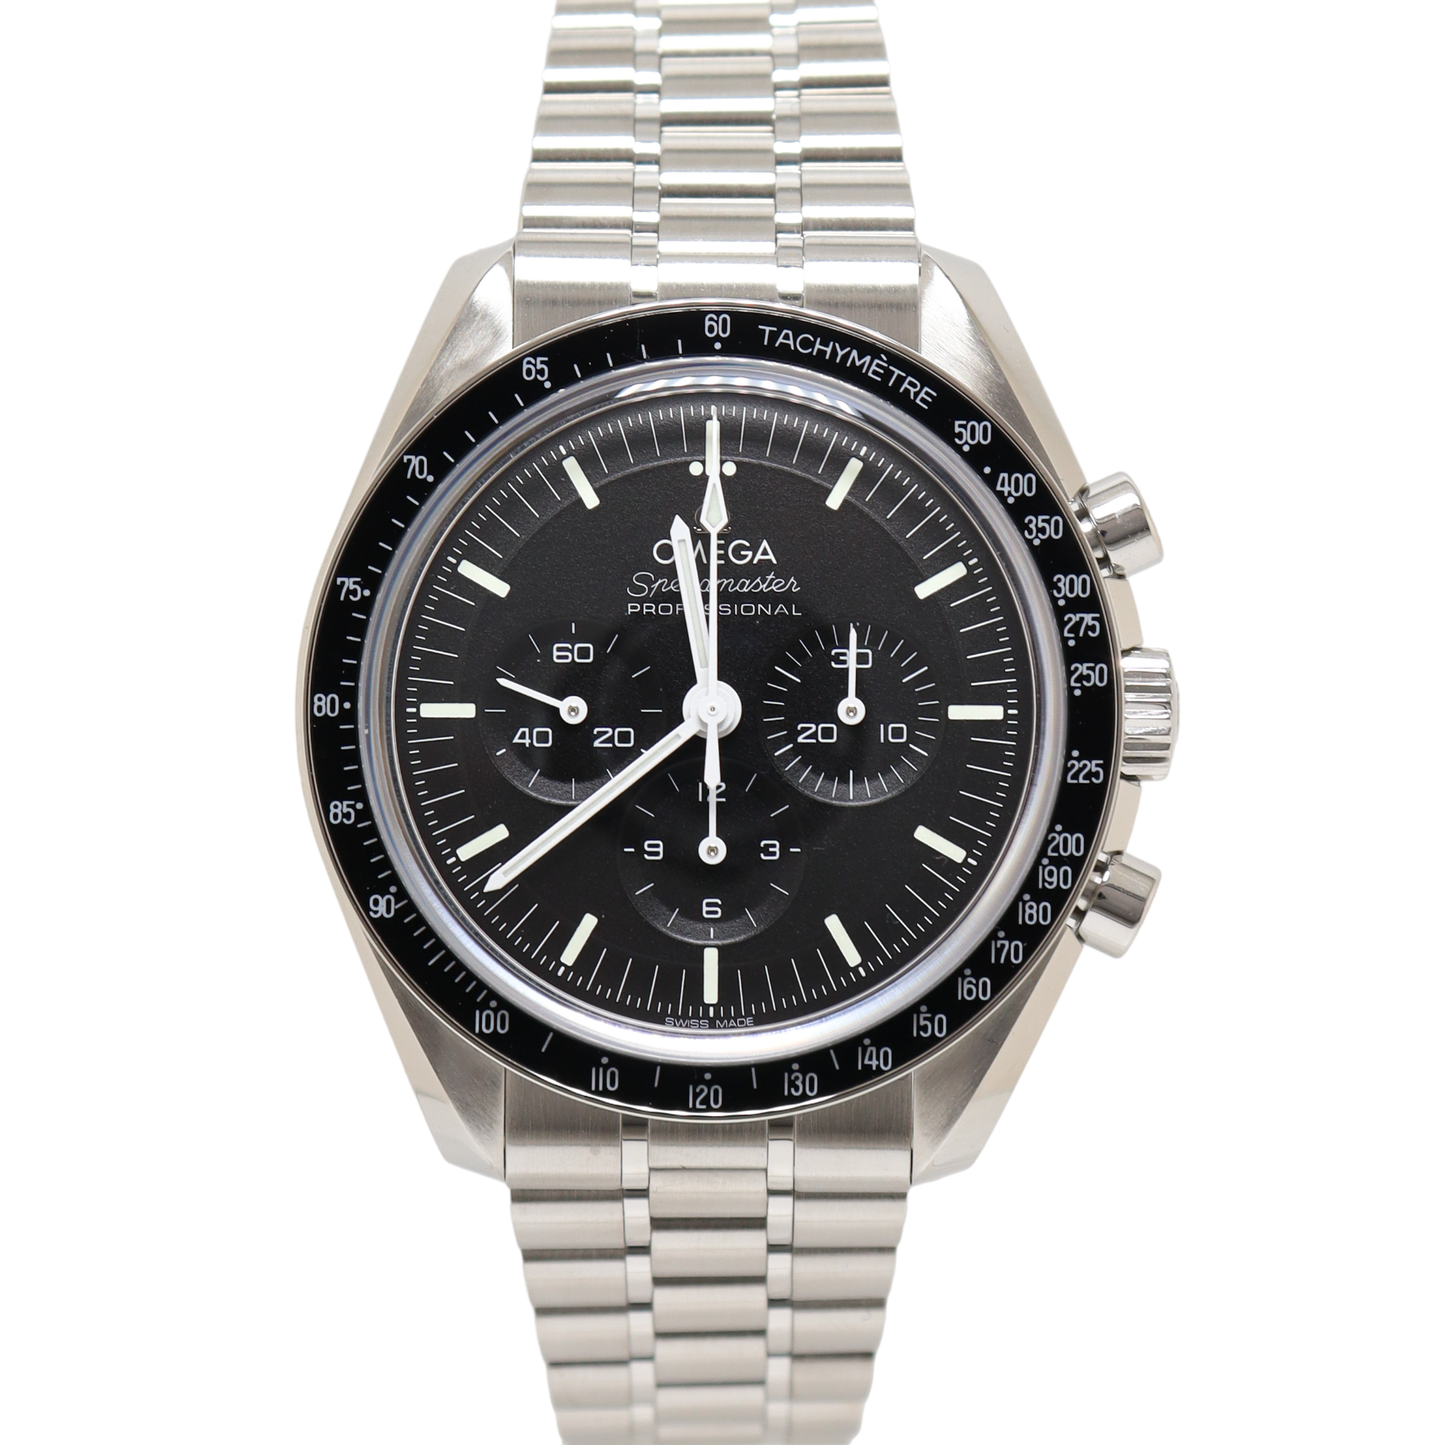 Omega Speedmaster Stainless Steel 42mm Black Chronograph Dial Watch Reference#: 310.30.42.50.01.002 - Happy Jewelers Fine Jewelry Lifetime Warranty